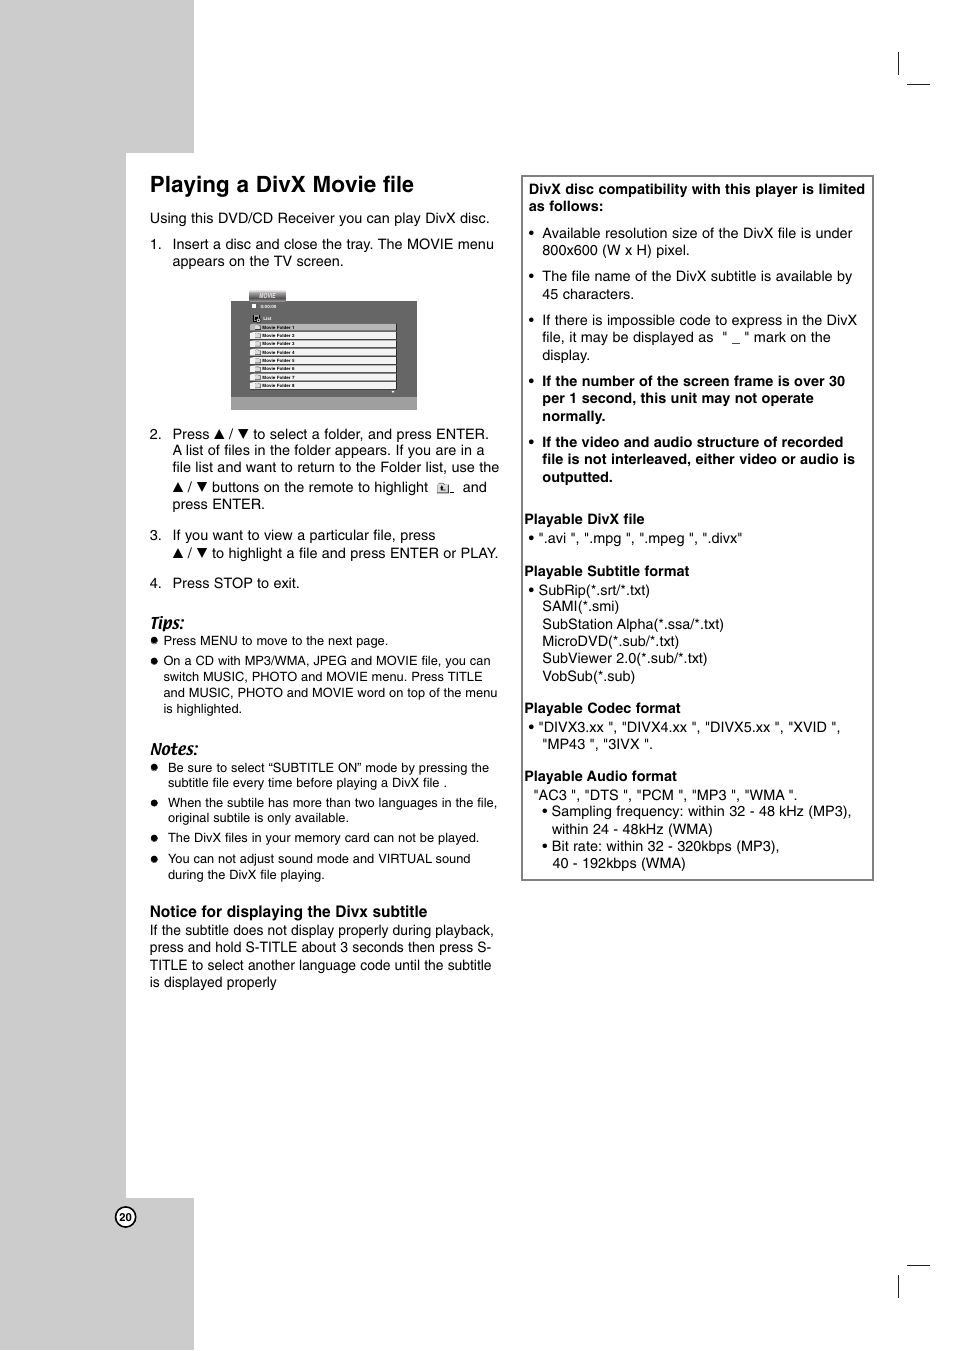 Playing a divx movie file, Notice for displaying the divx subtitle | LG LH-T755 User Manual | Page 20 / 29